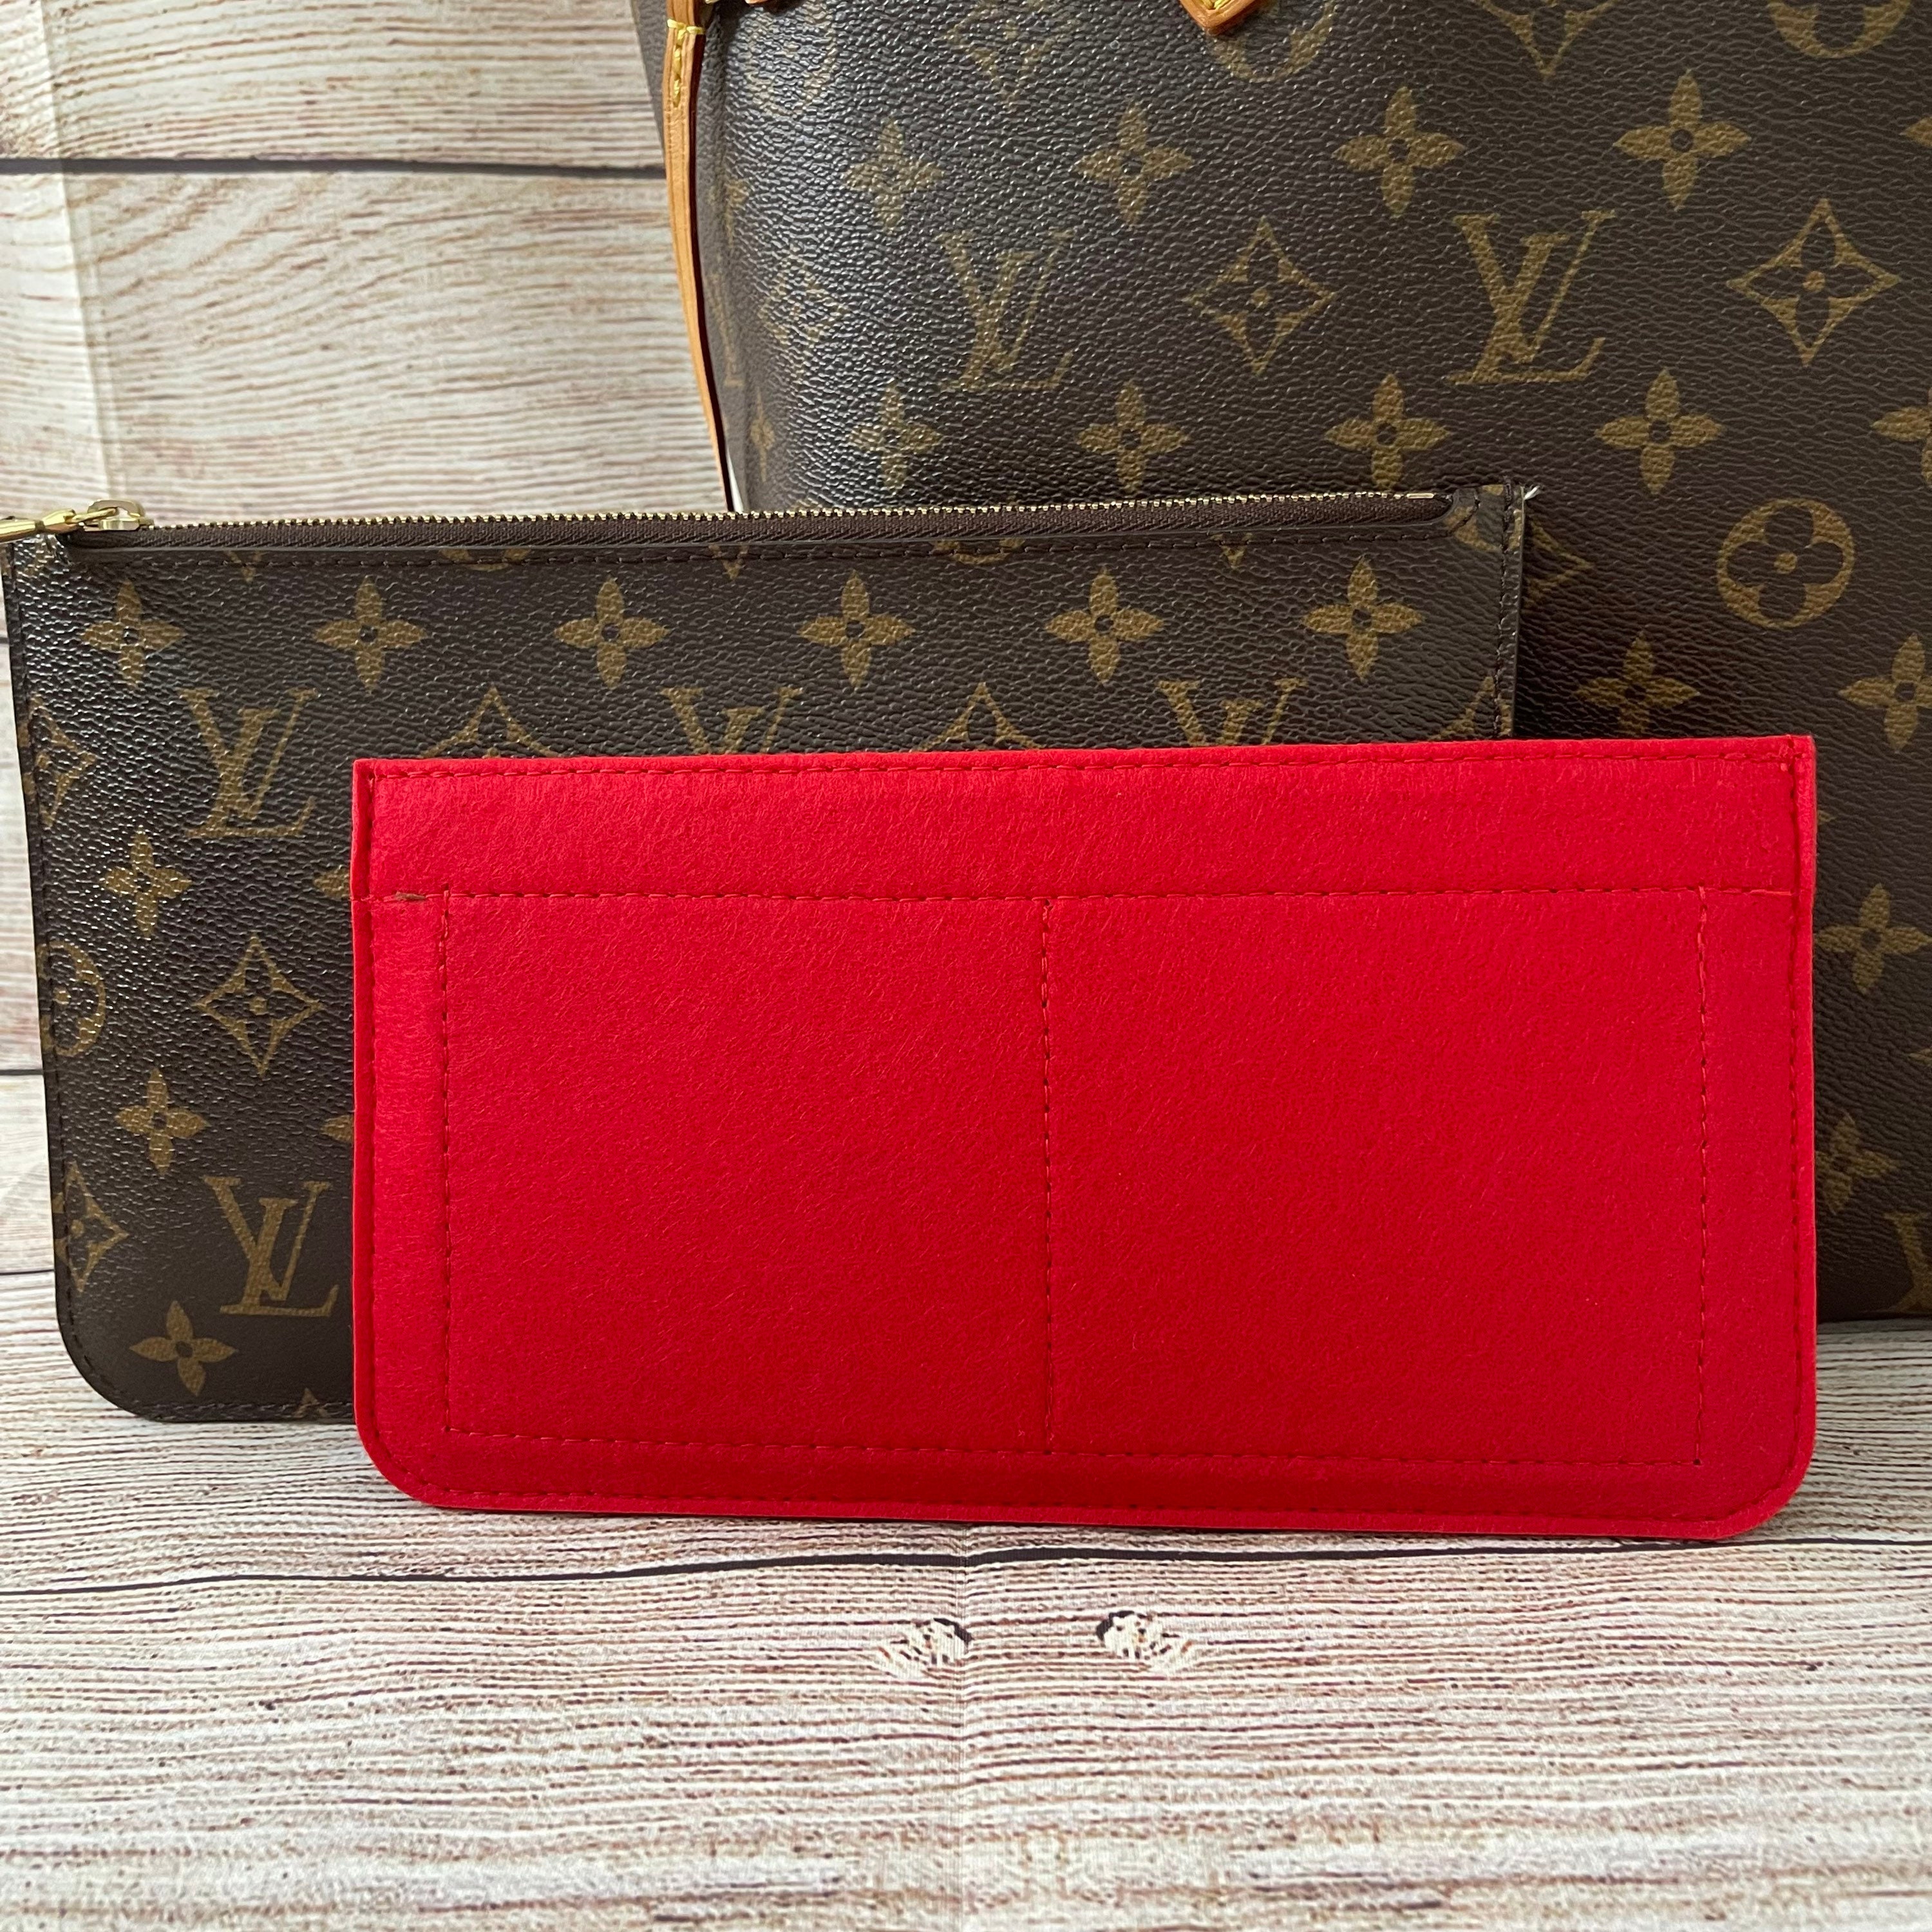 LV 4 bags and 1 Supreme wallet personal collecton - clothing